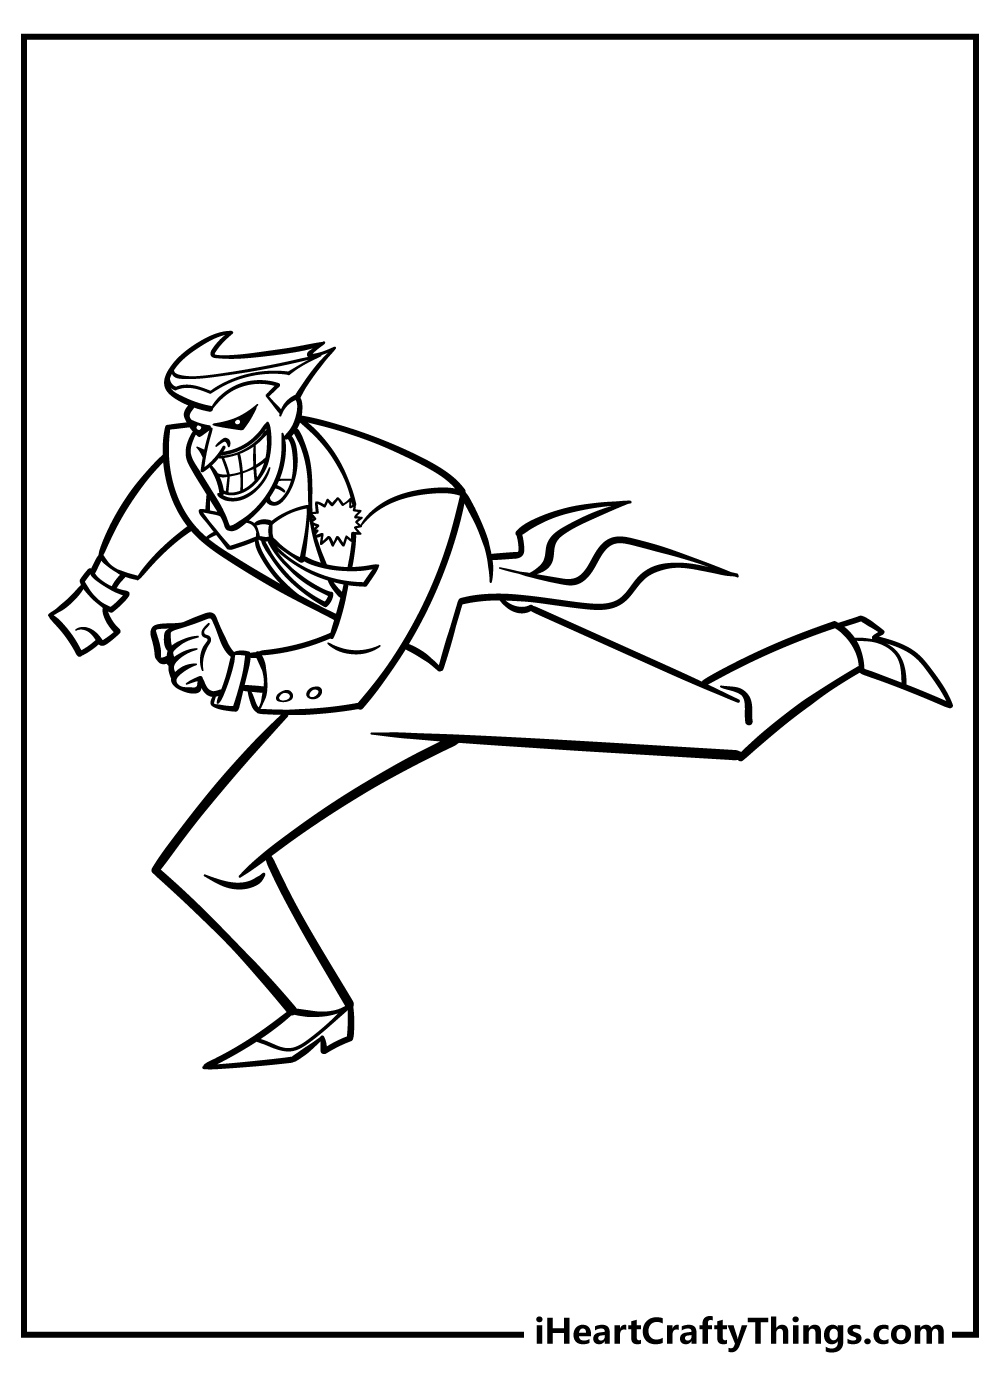 Joker Coloring Pages for kids free download